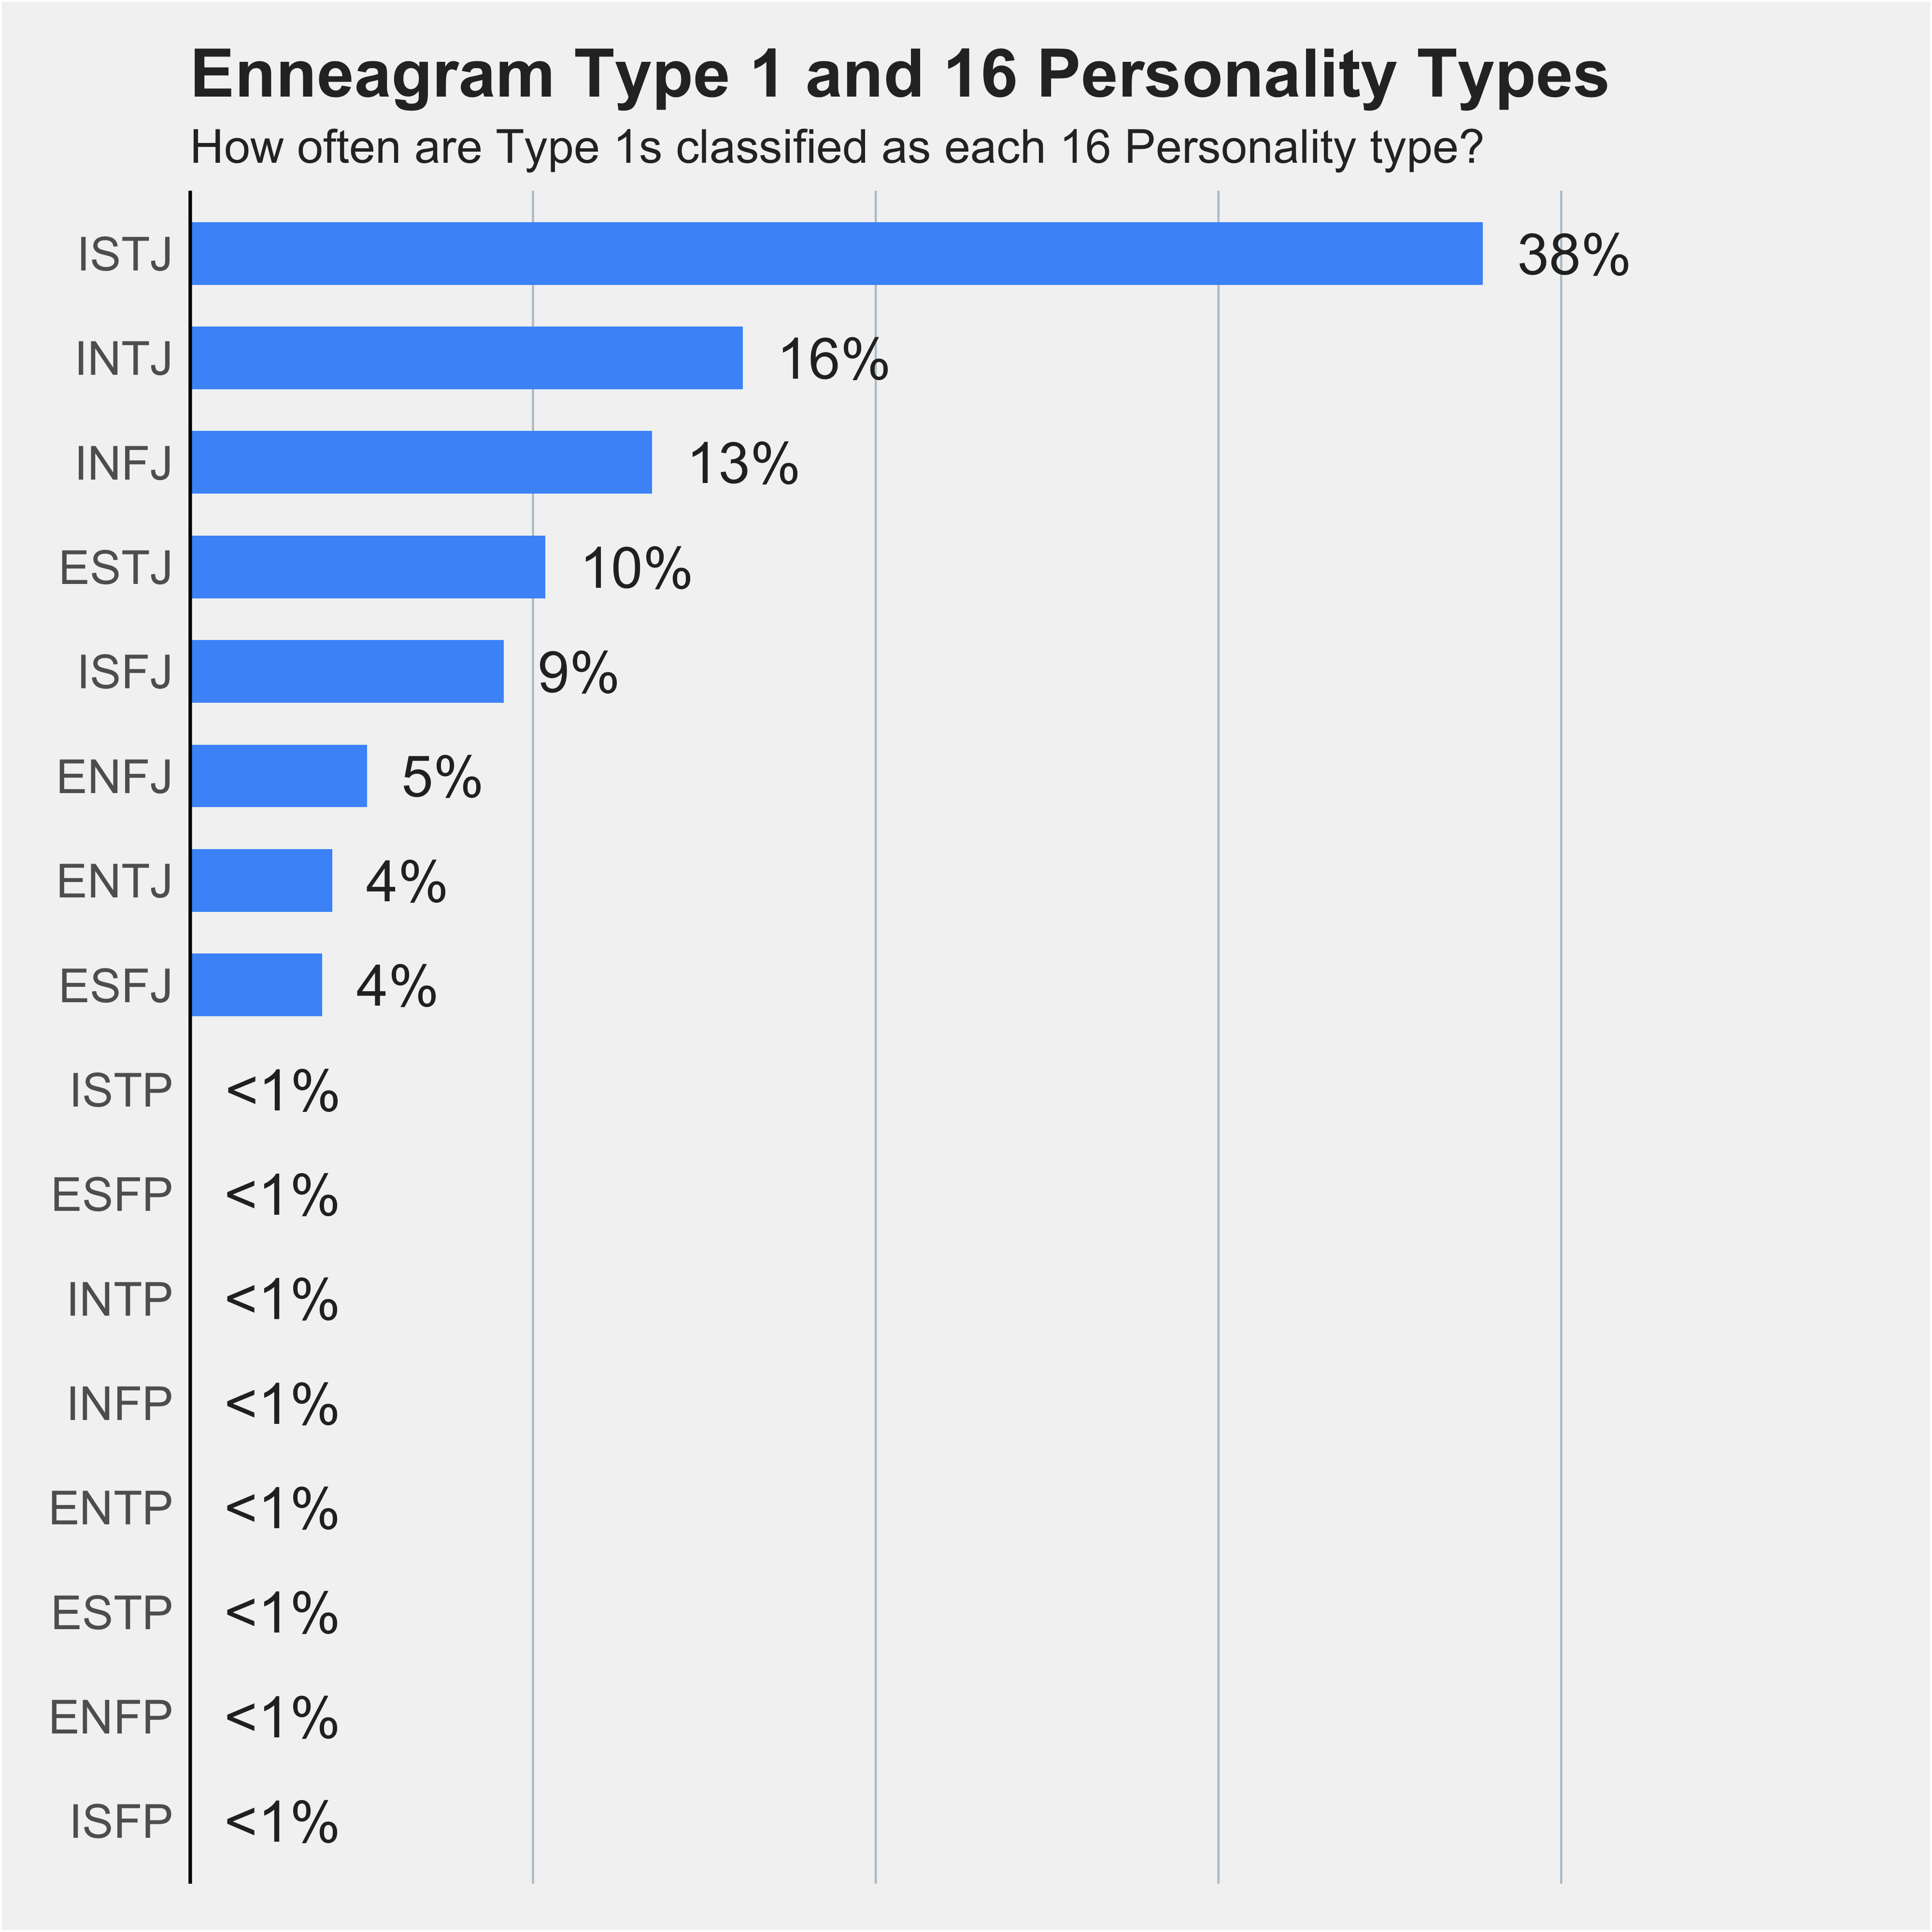 Chart of Type 1s percentages across 16 Personality types 